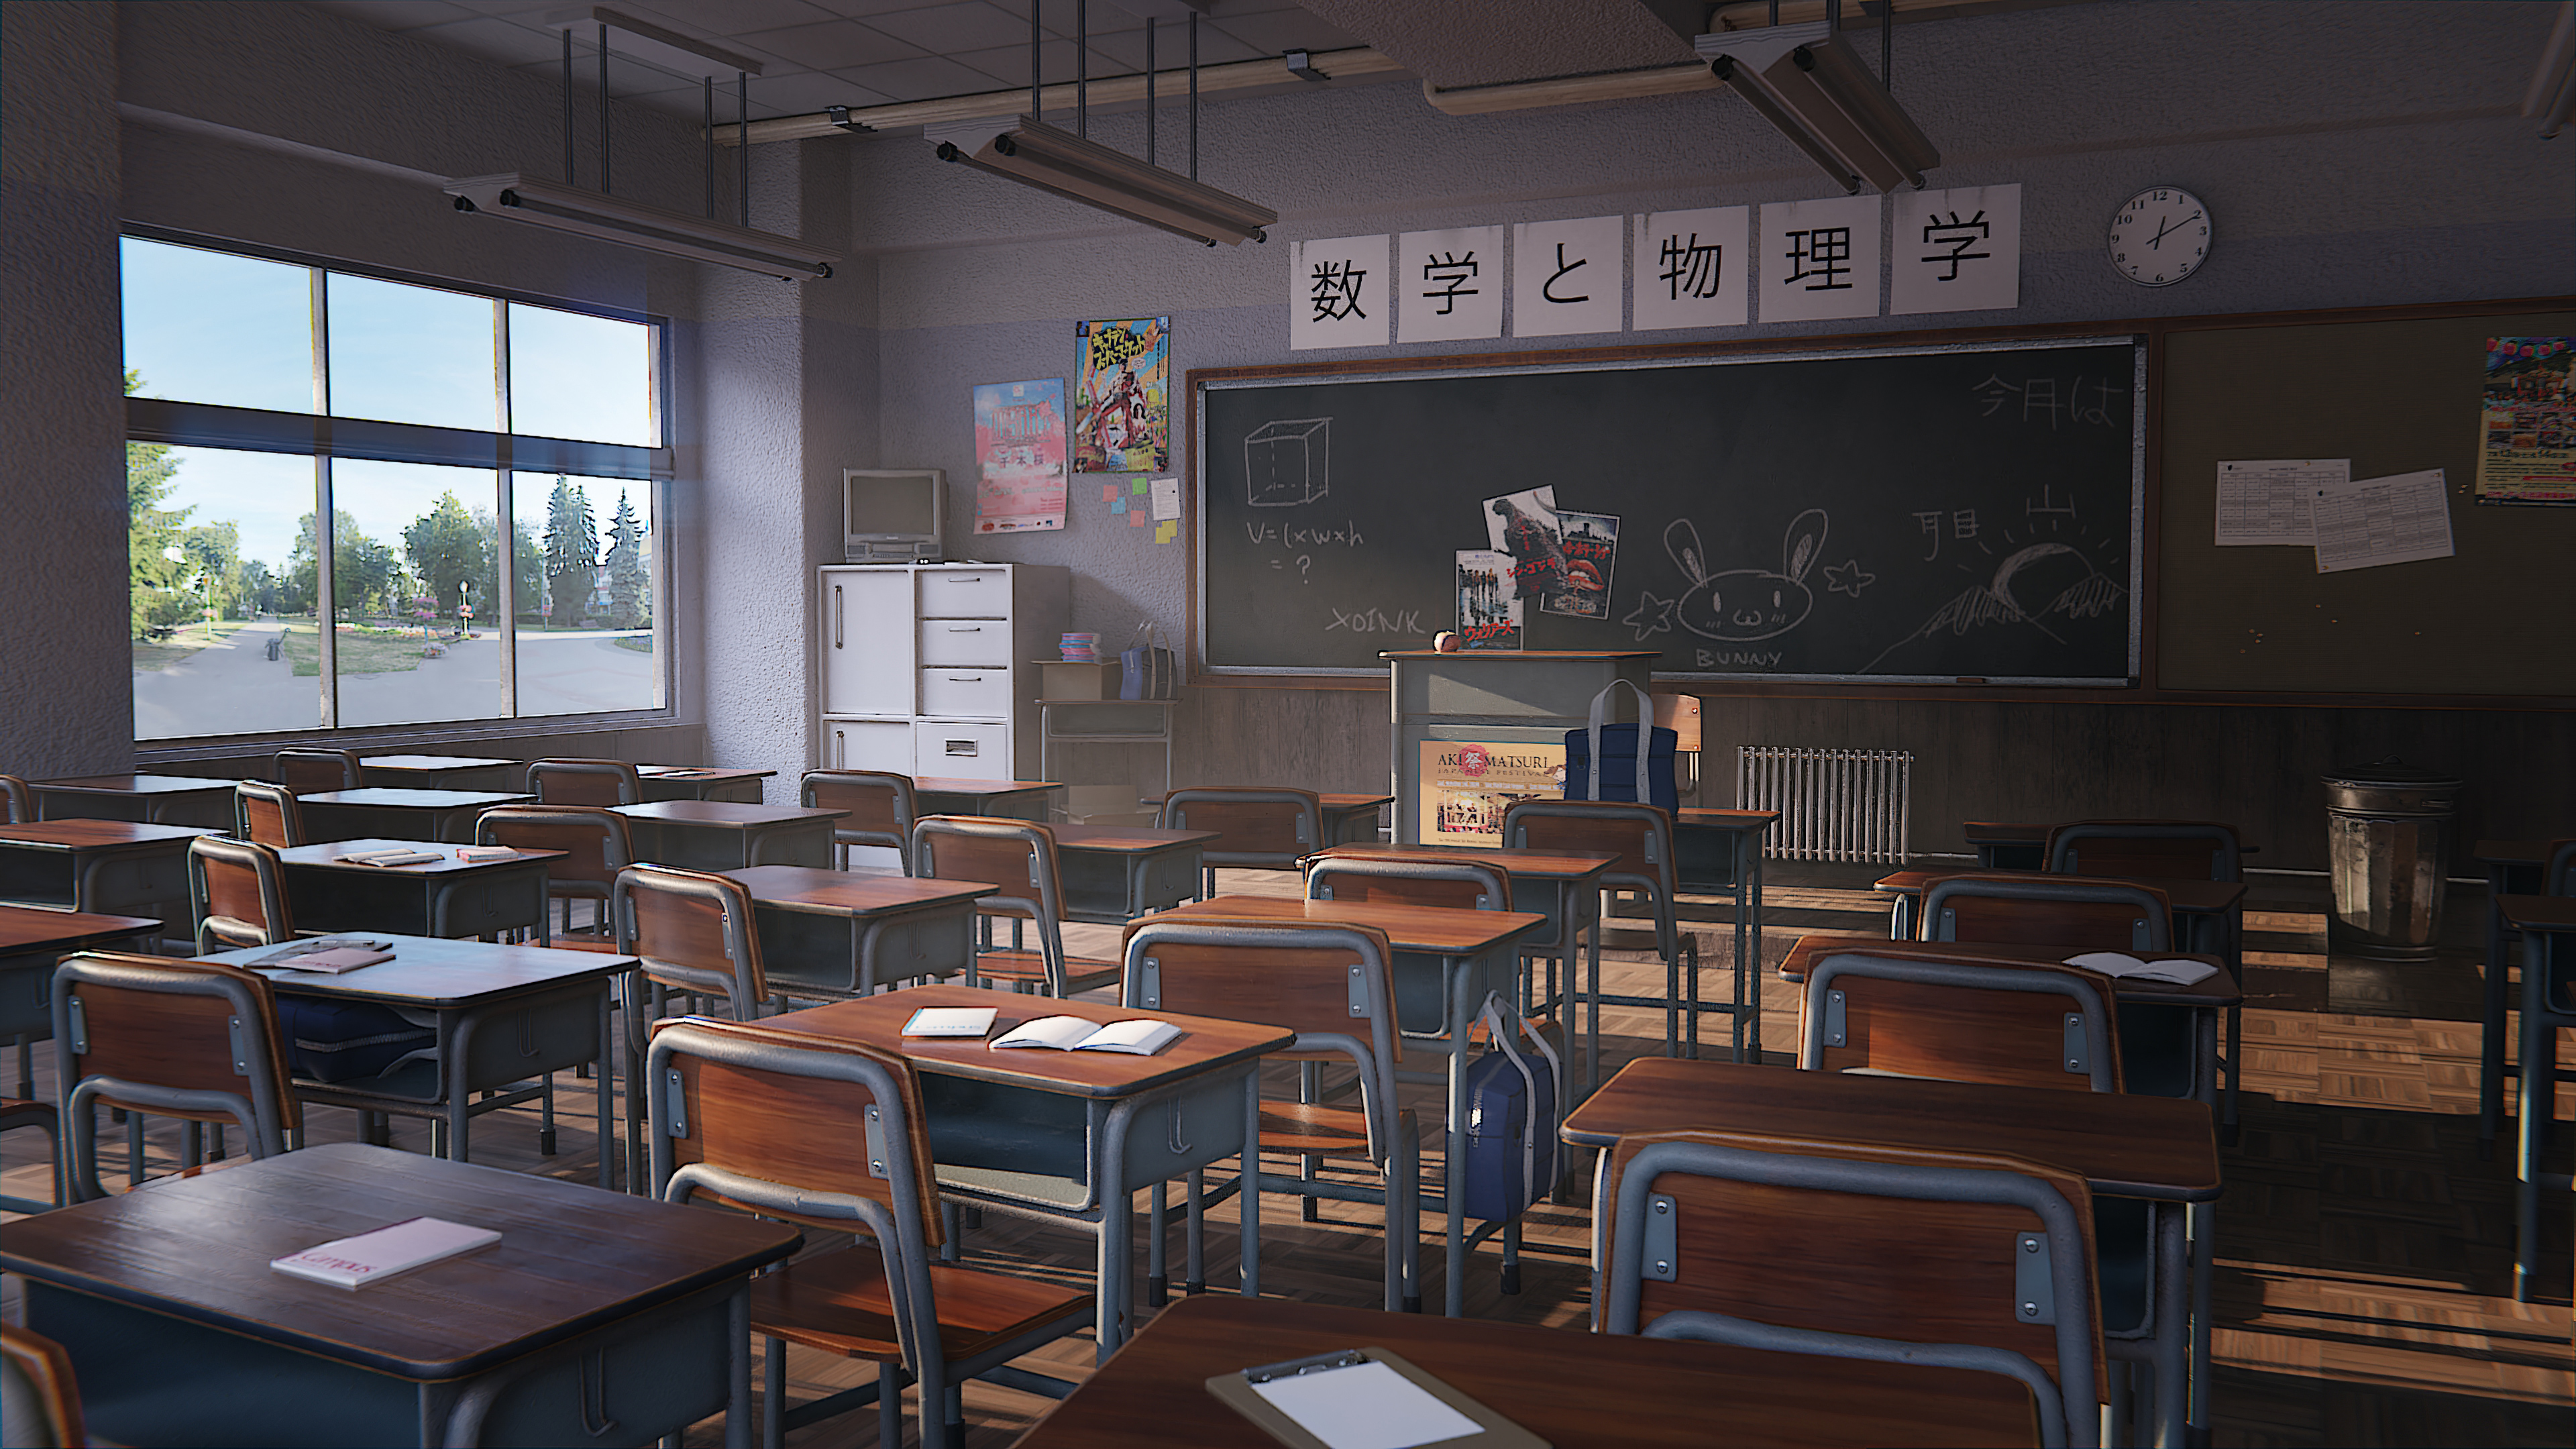 Anime Classroom HD Wallpaper | Background Image